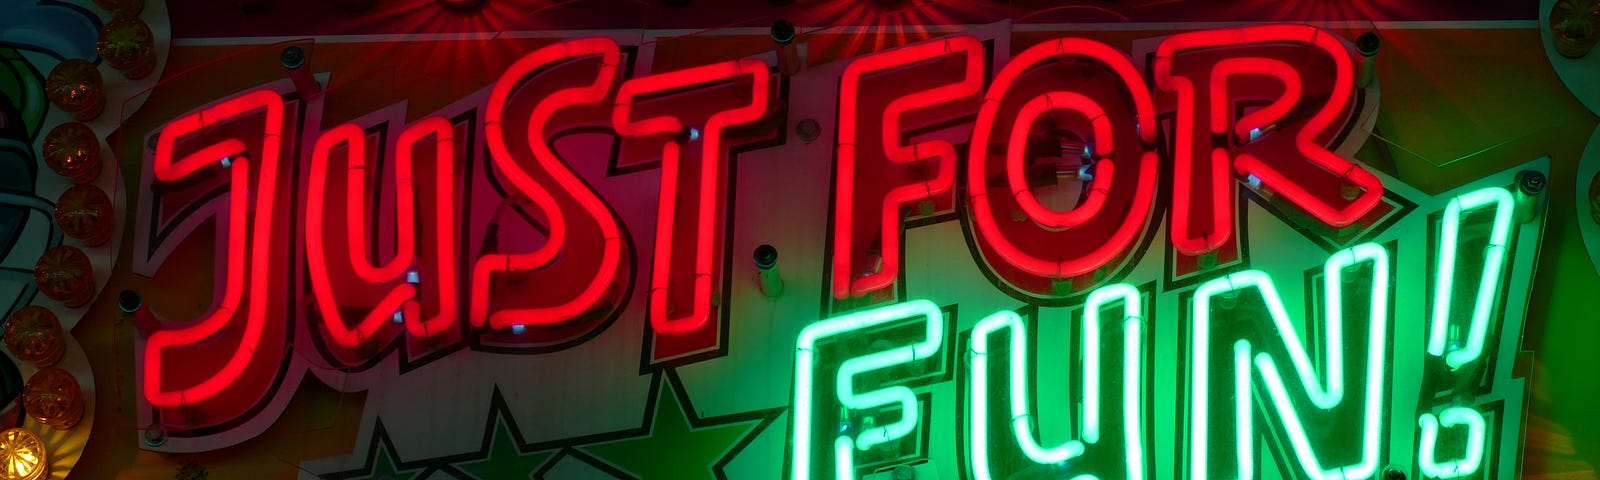 image shows a neon sign that reads “Just For Fun” in red and green lights